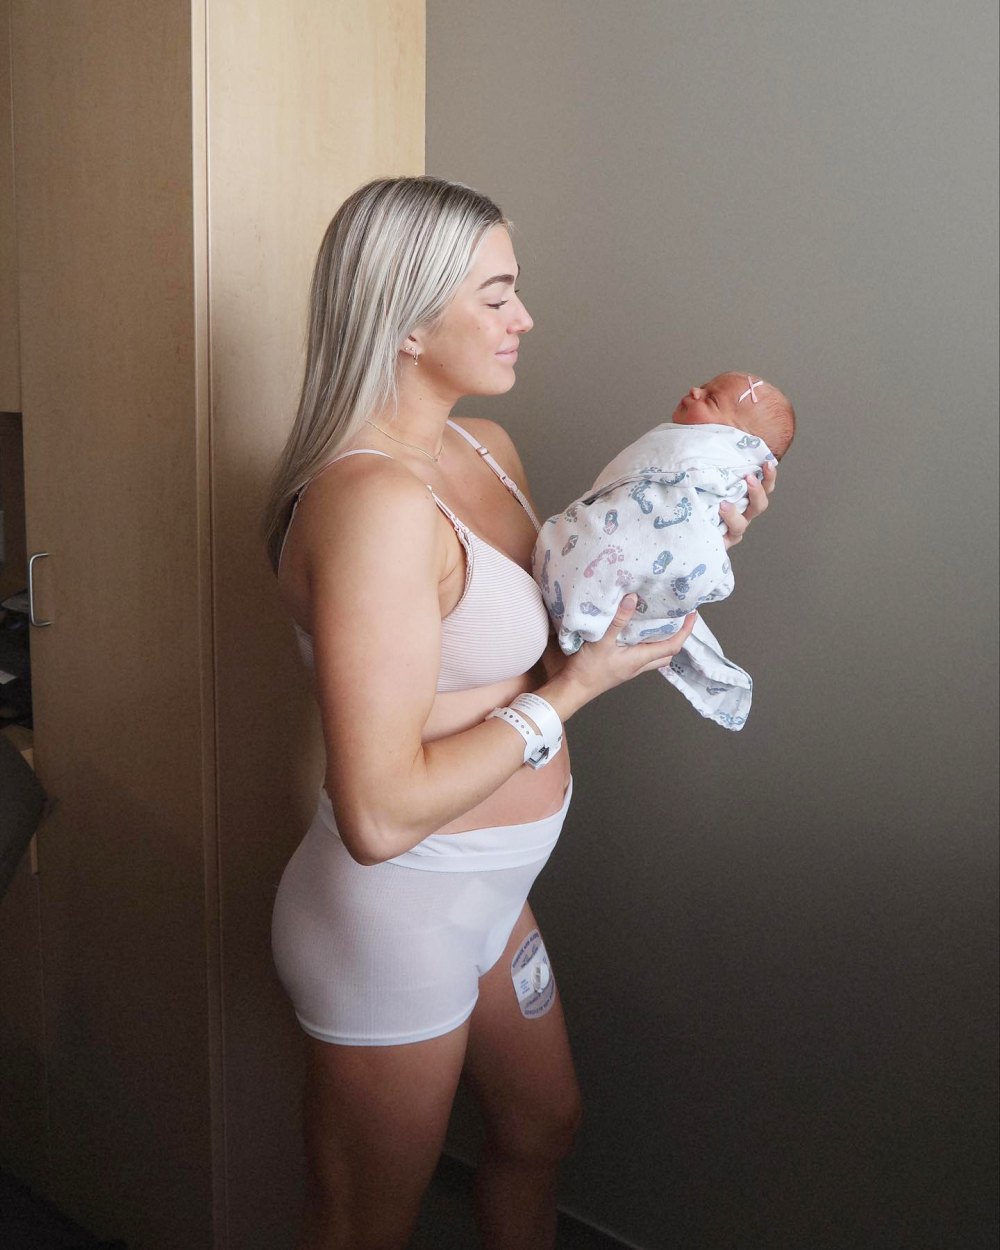 Lindsay Arnold Praises Postpartum Body Less Than 1 Week After Giving Birth to Daughter June